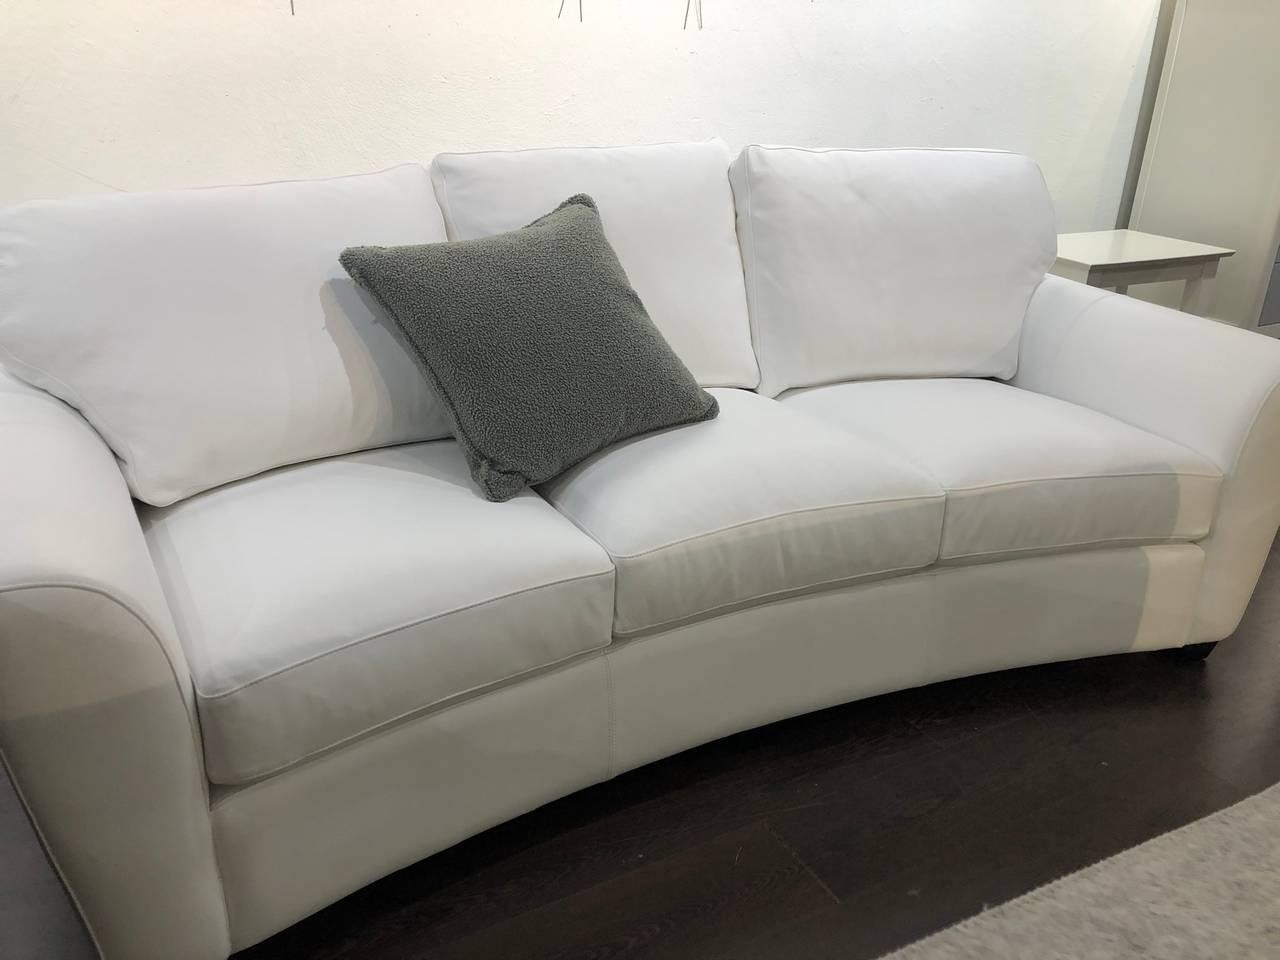 Lot monaco curved leather sofa by brentwood classic